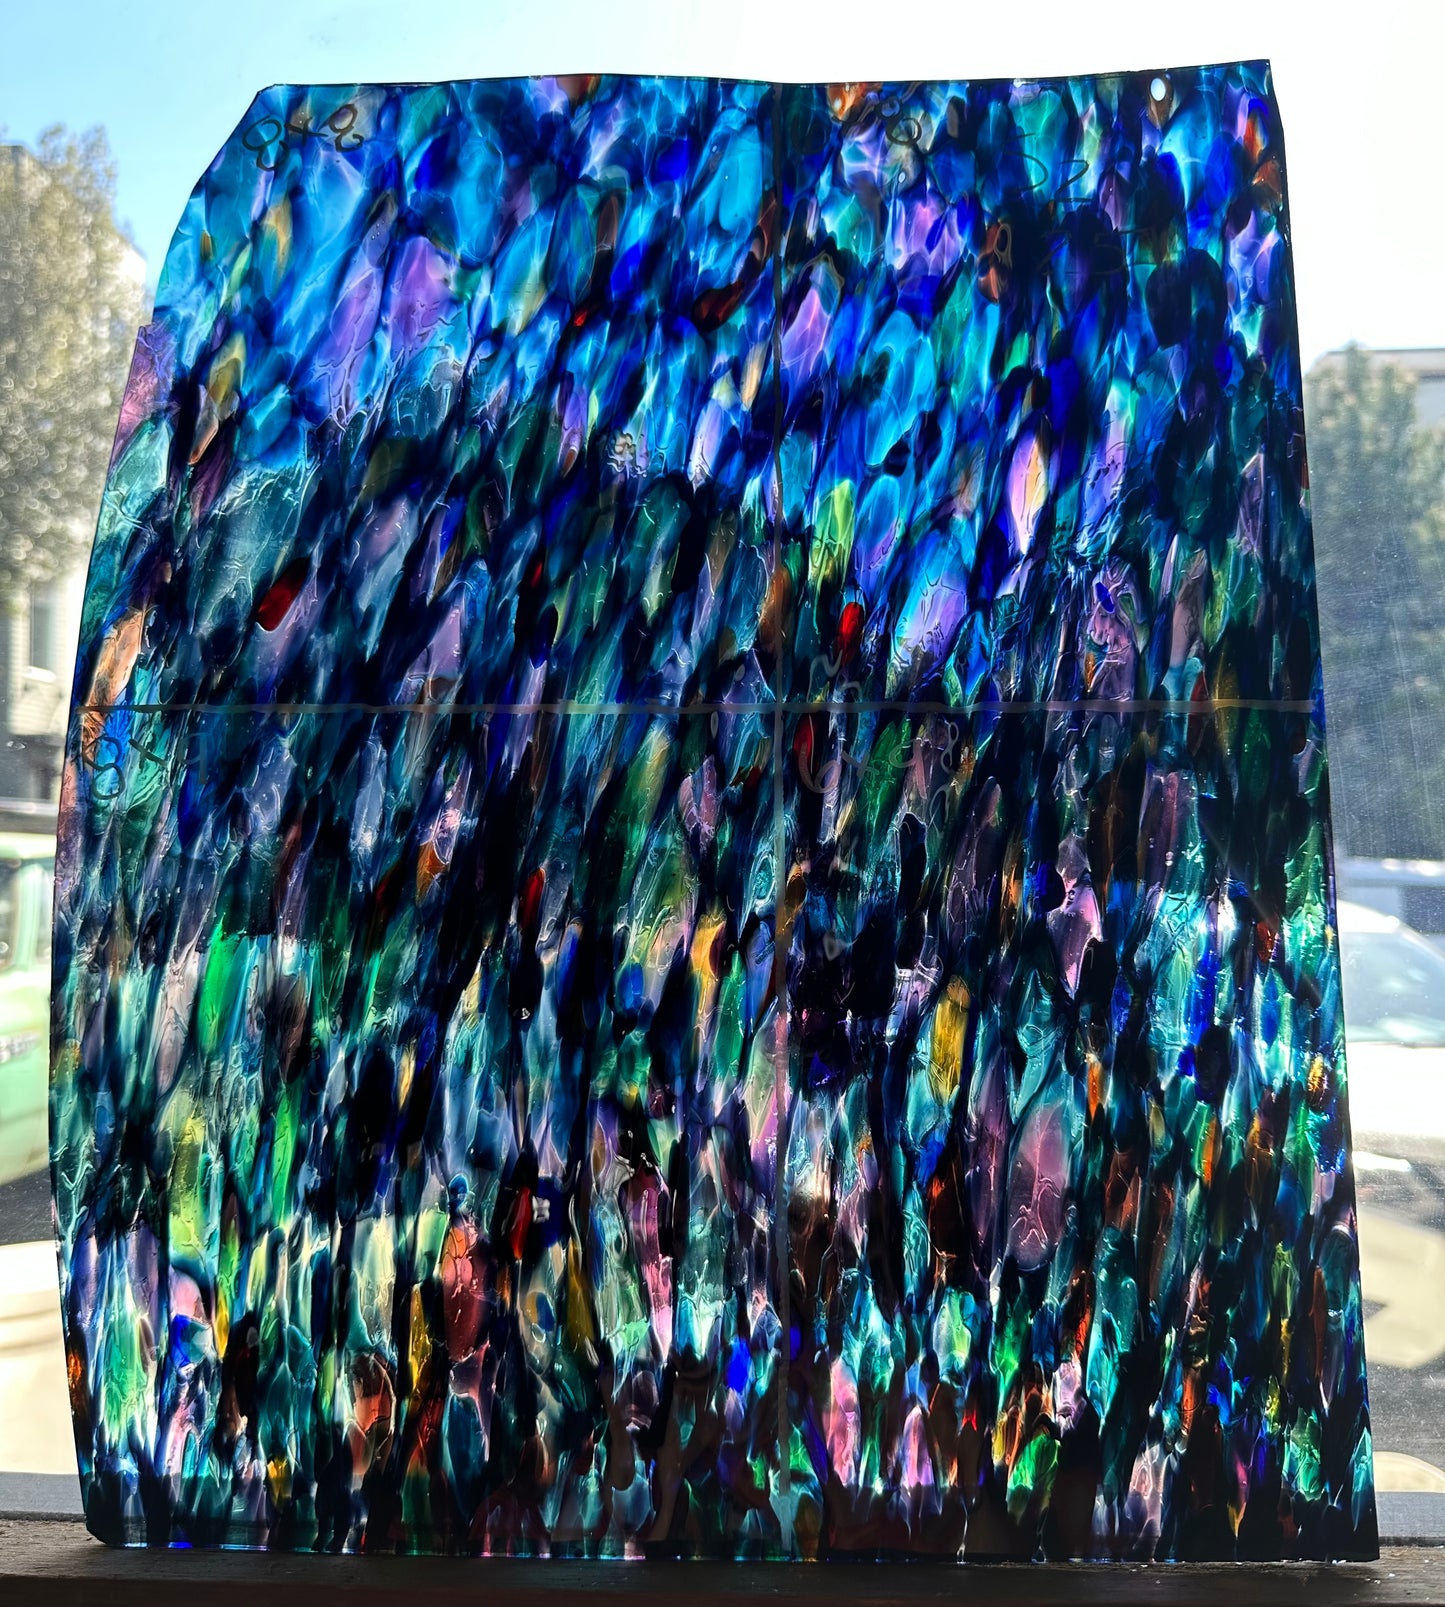 S2 251 SF “Stained glass”